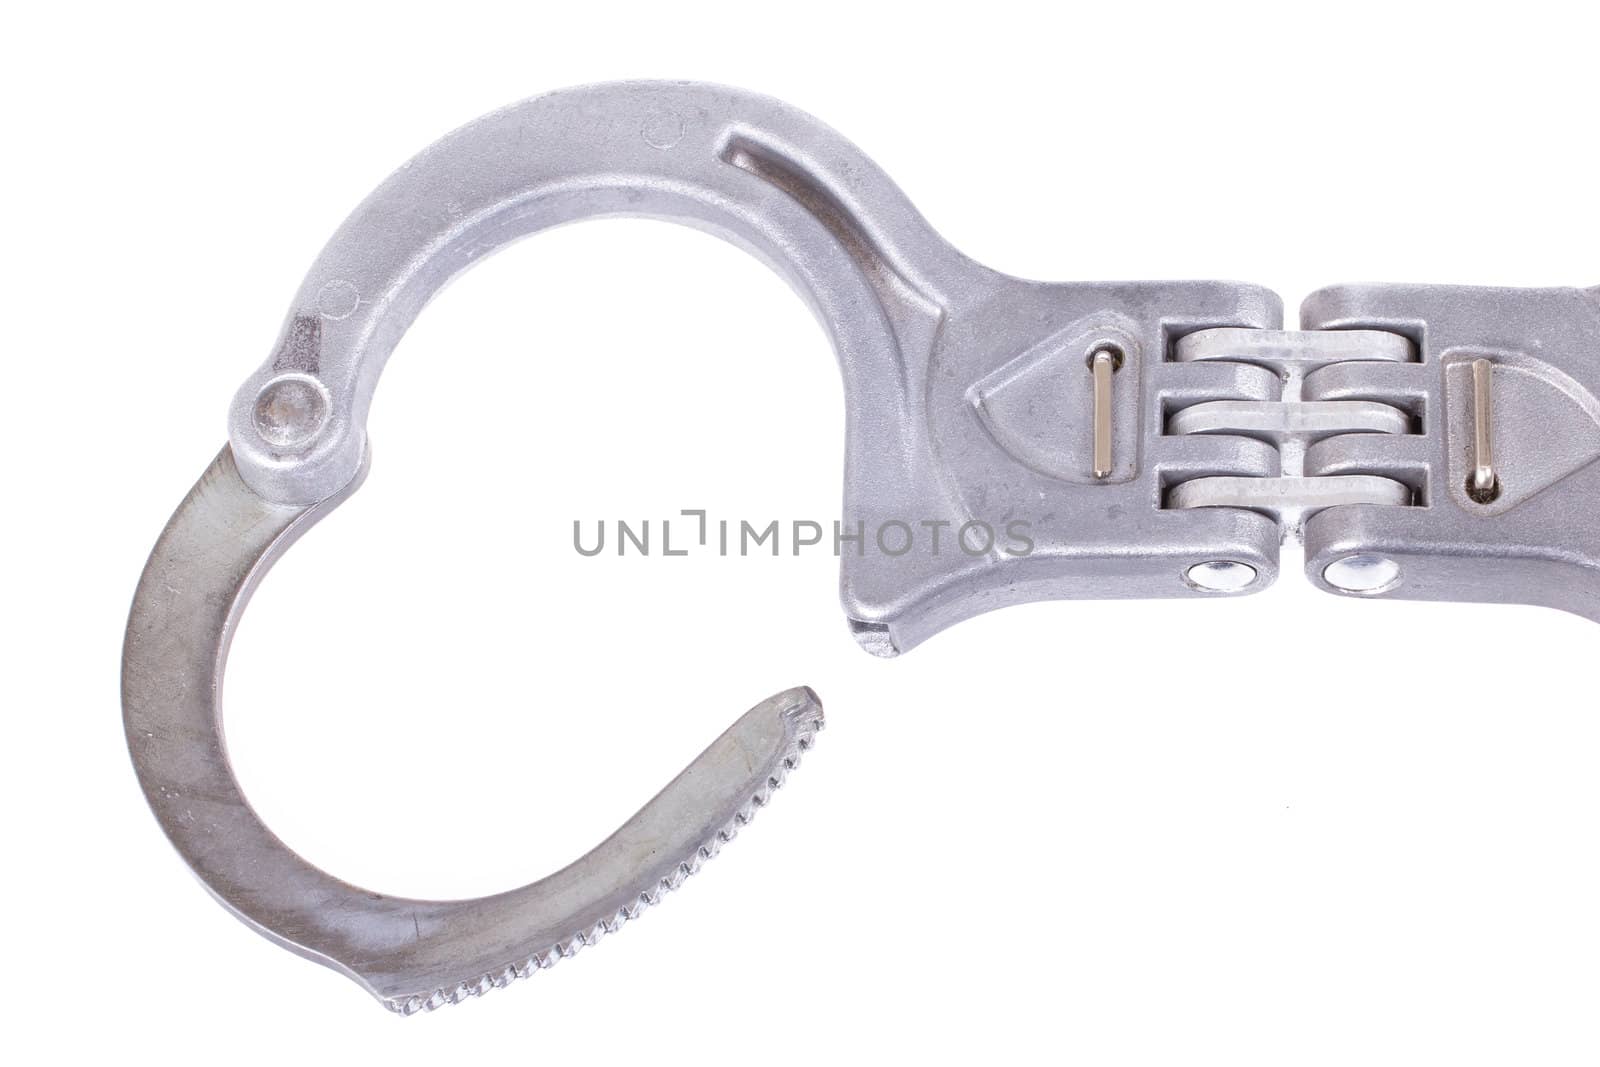 A close-up of metal handcuffs isolated on a white background